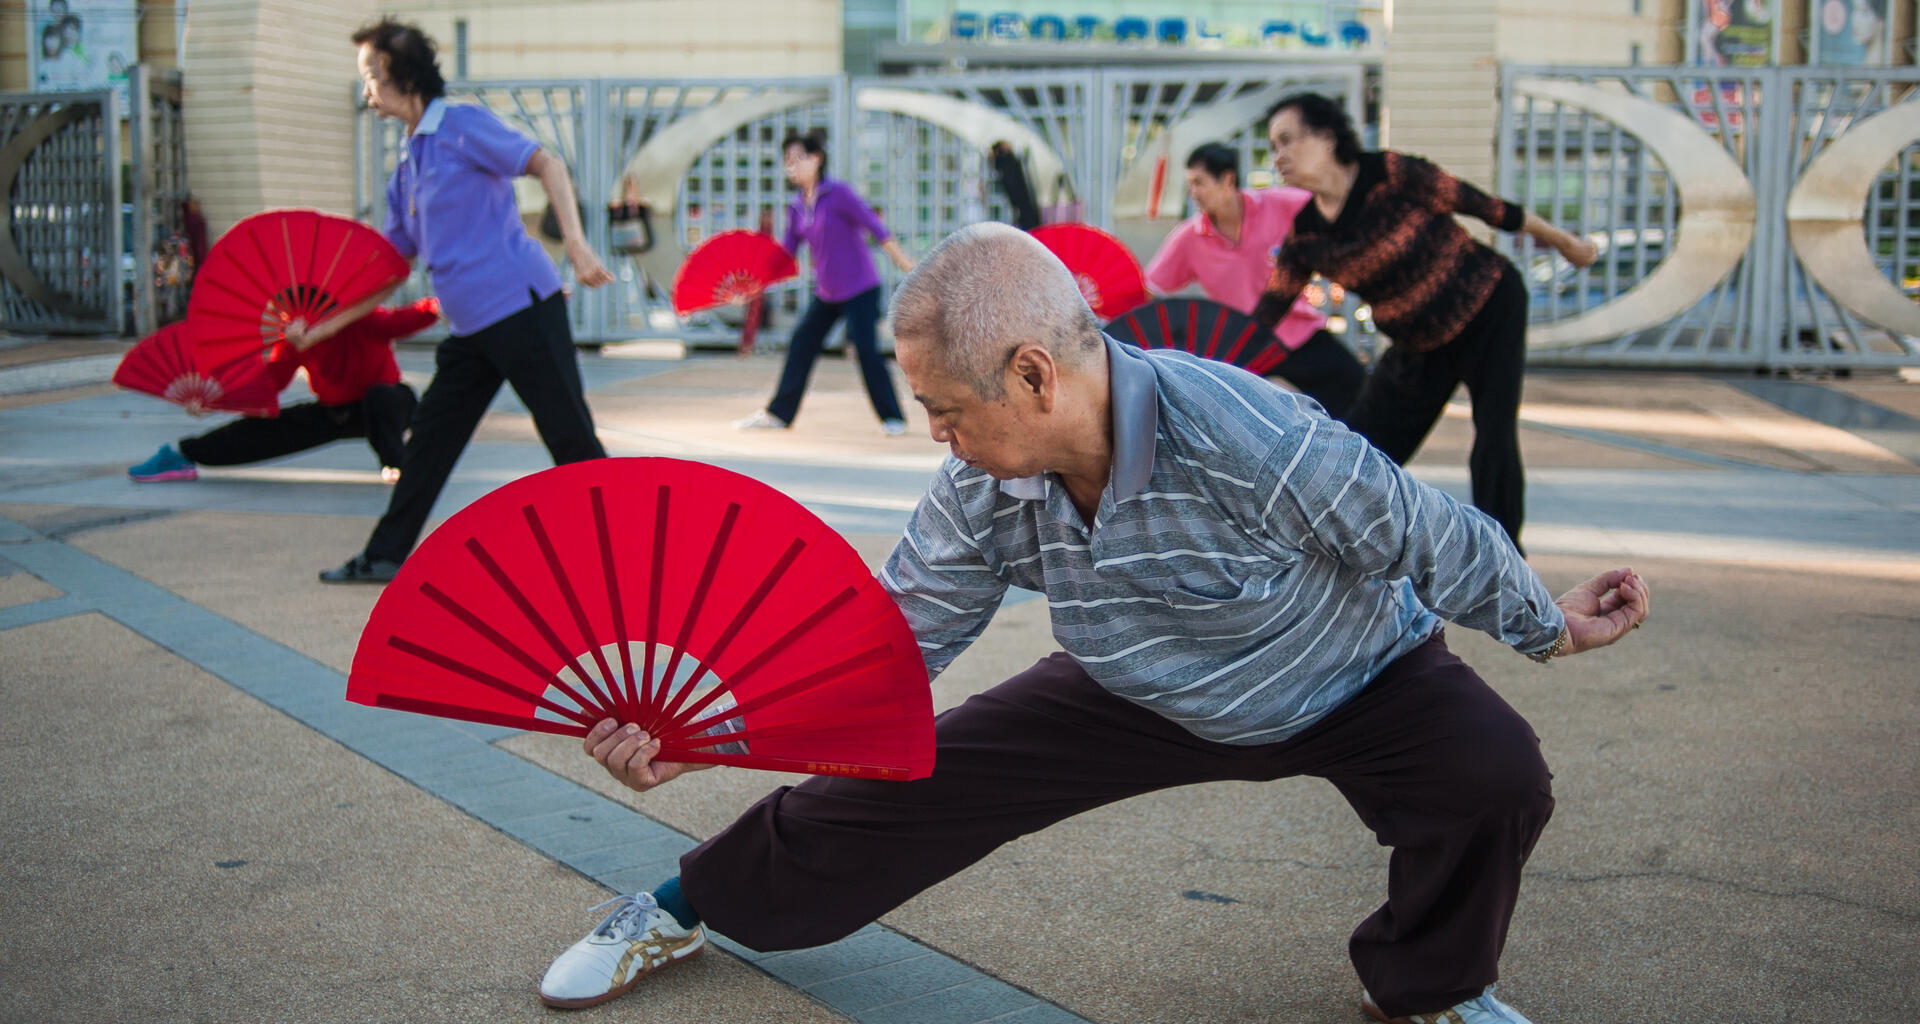 A group of elderly people perform with colourful fans.